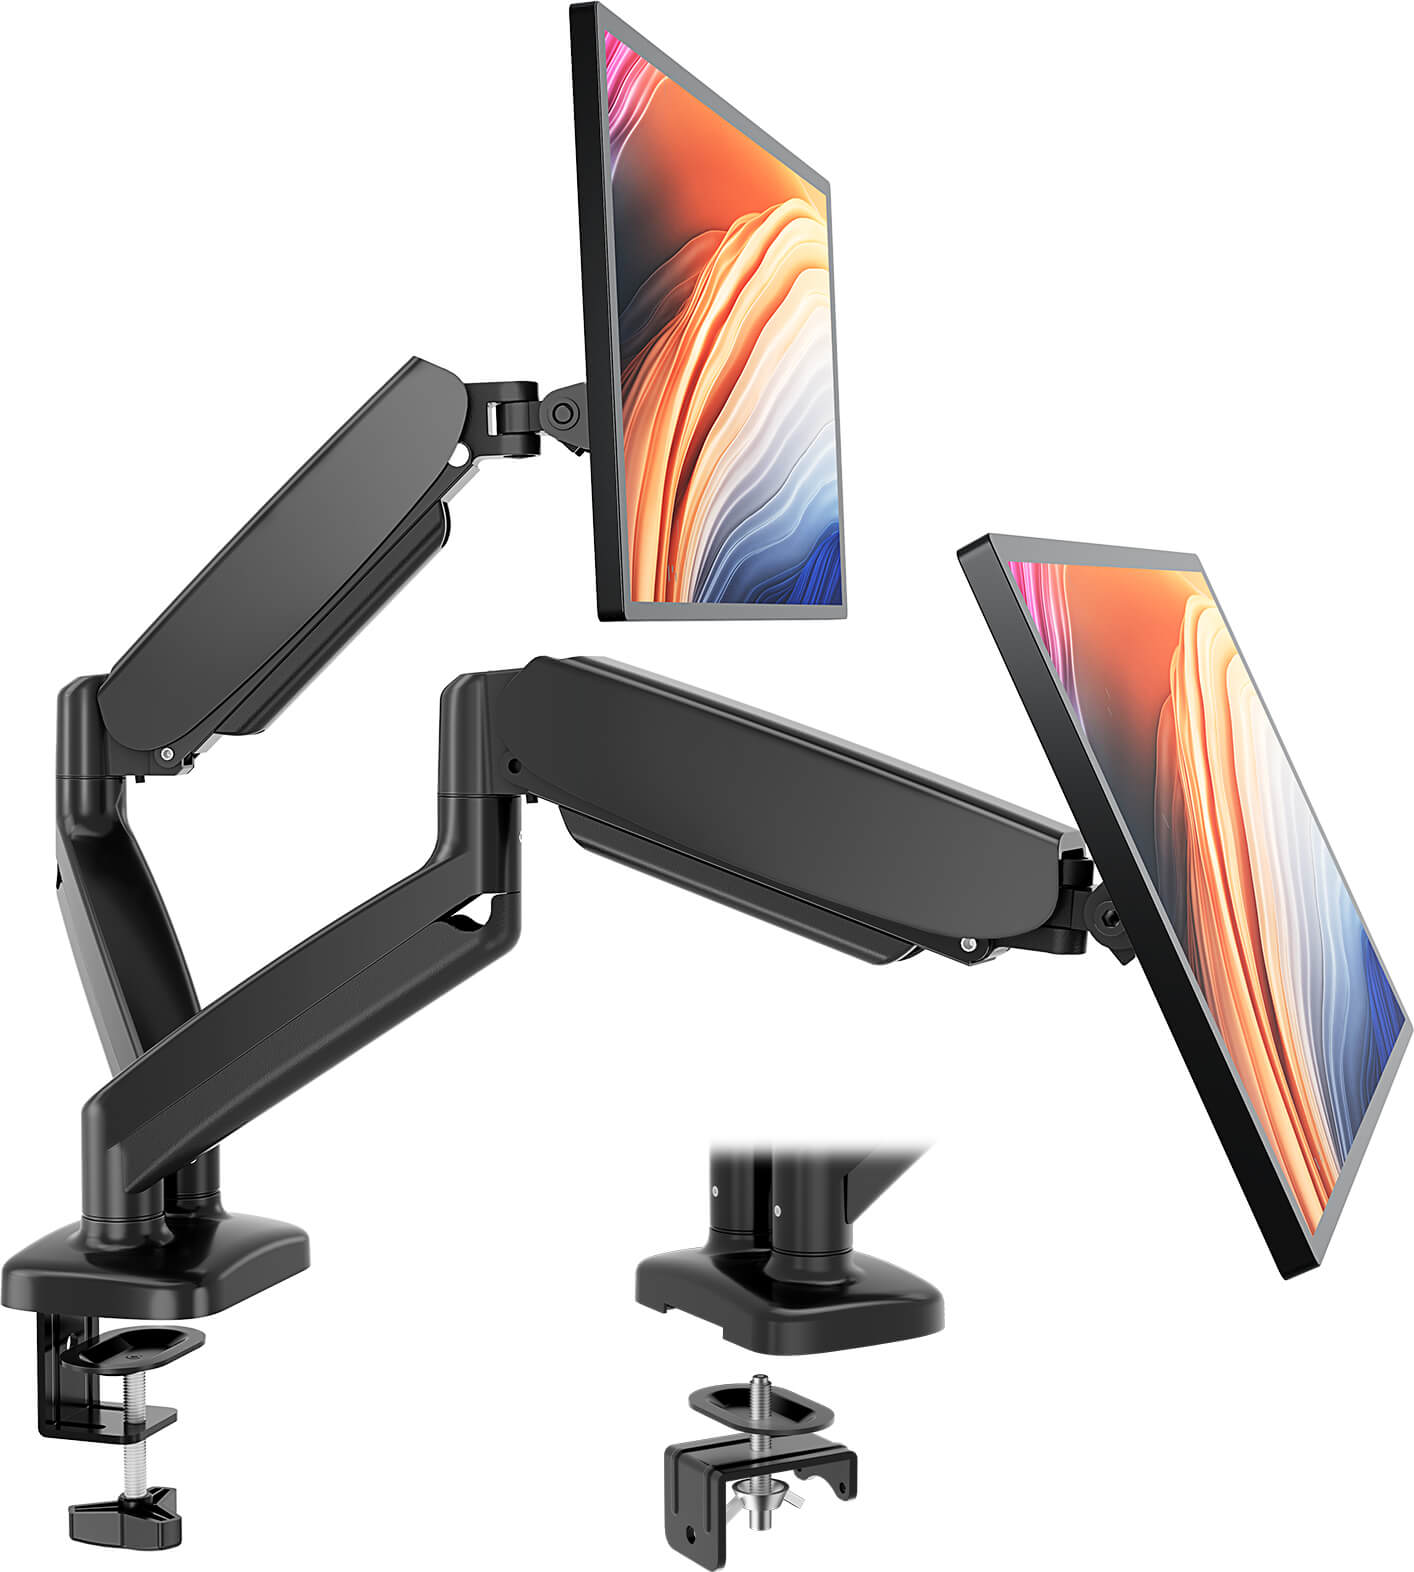 Dual Monitor Stand - Adjustable Gas Spring Monitor Desk Mount Swivel Vesa Bracket with C Clamp, Grommet Mounting Base for 15 to 32 Inch Computer Screens